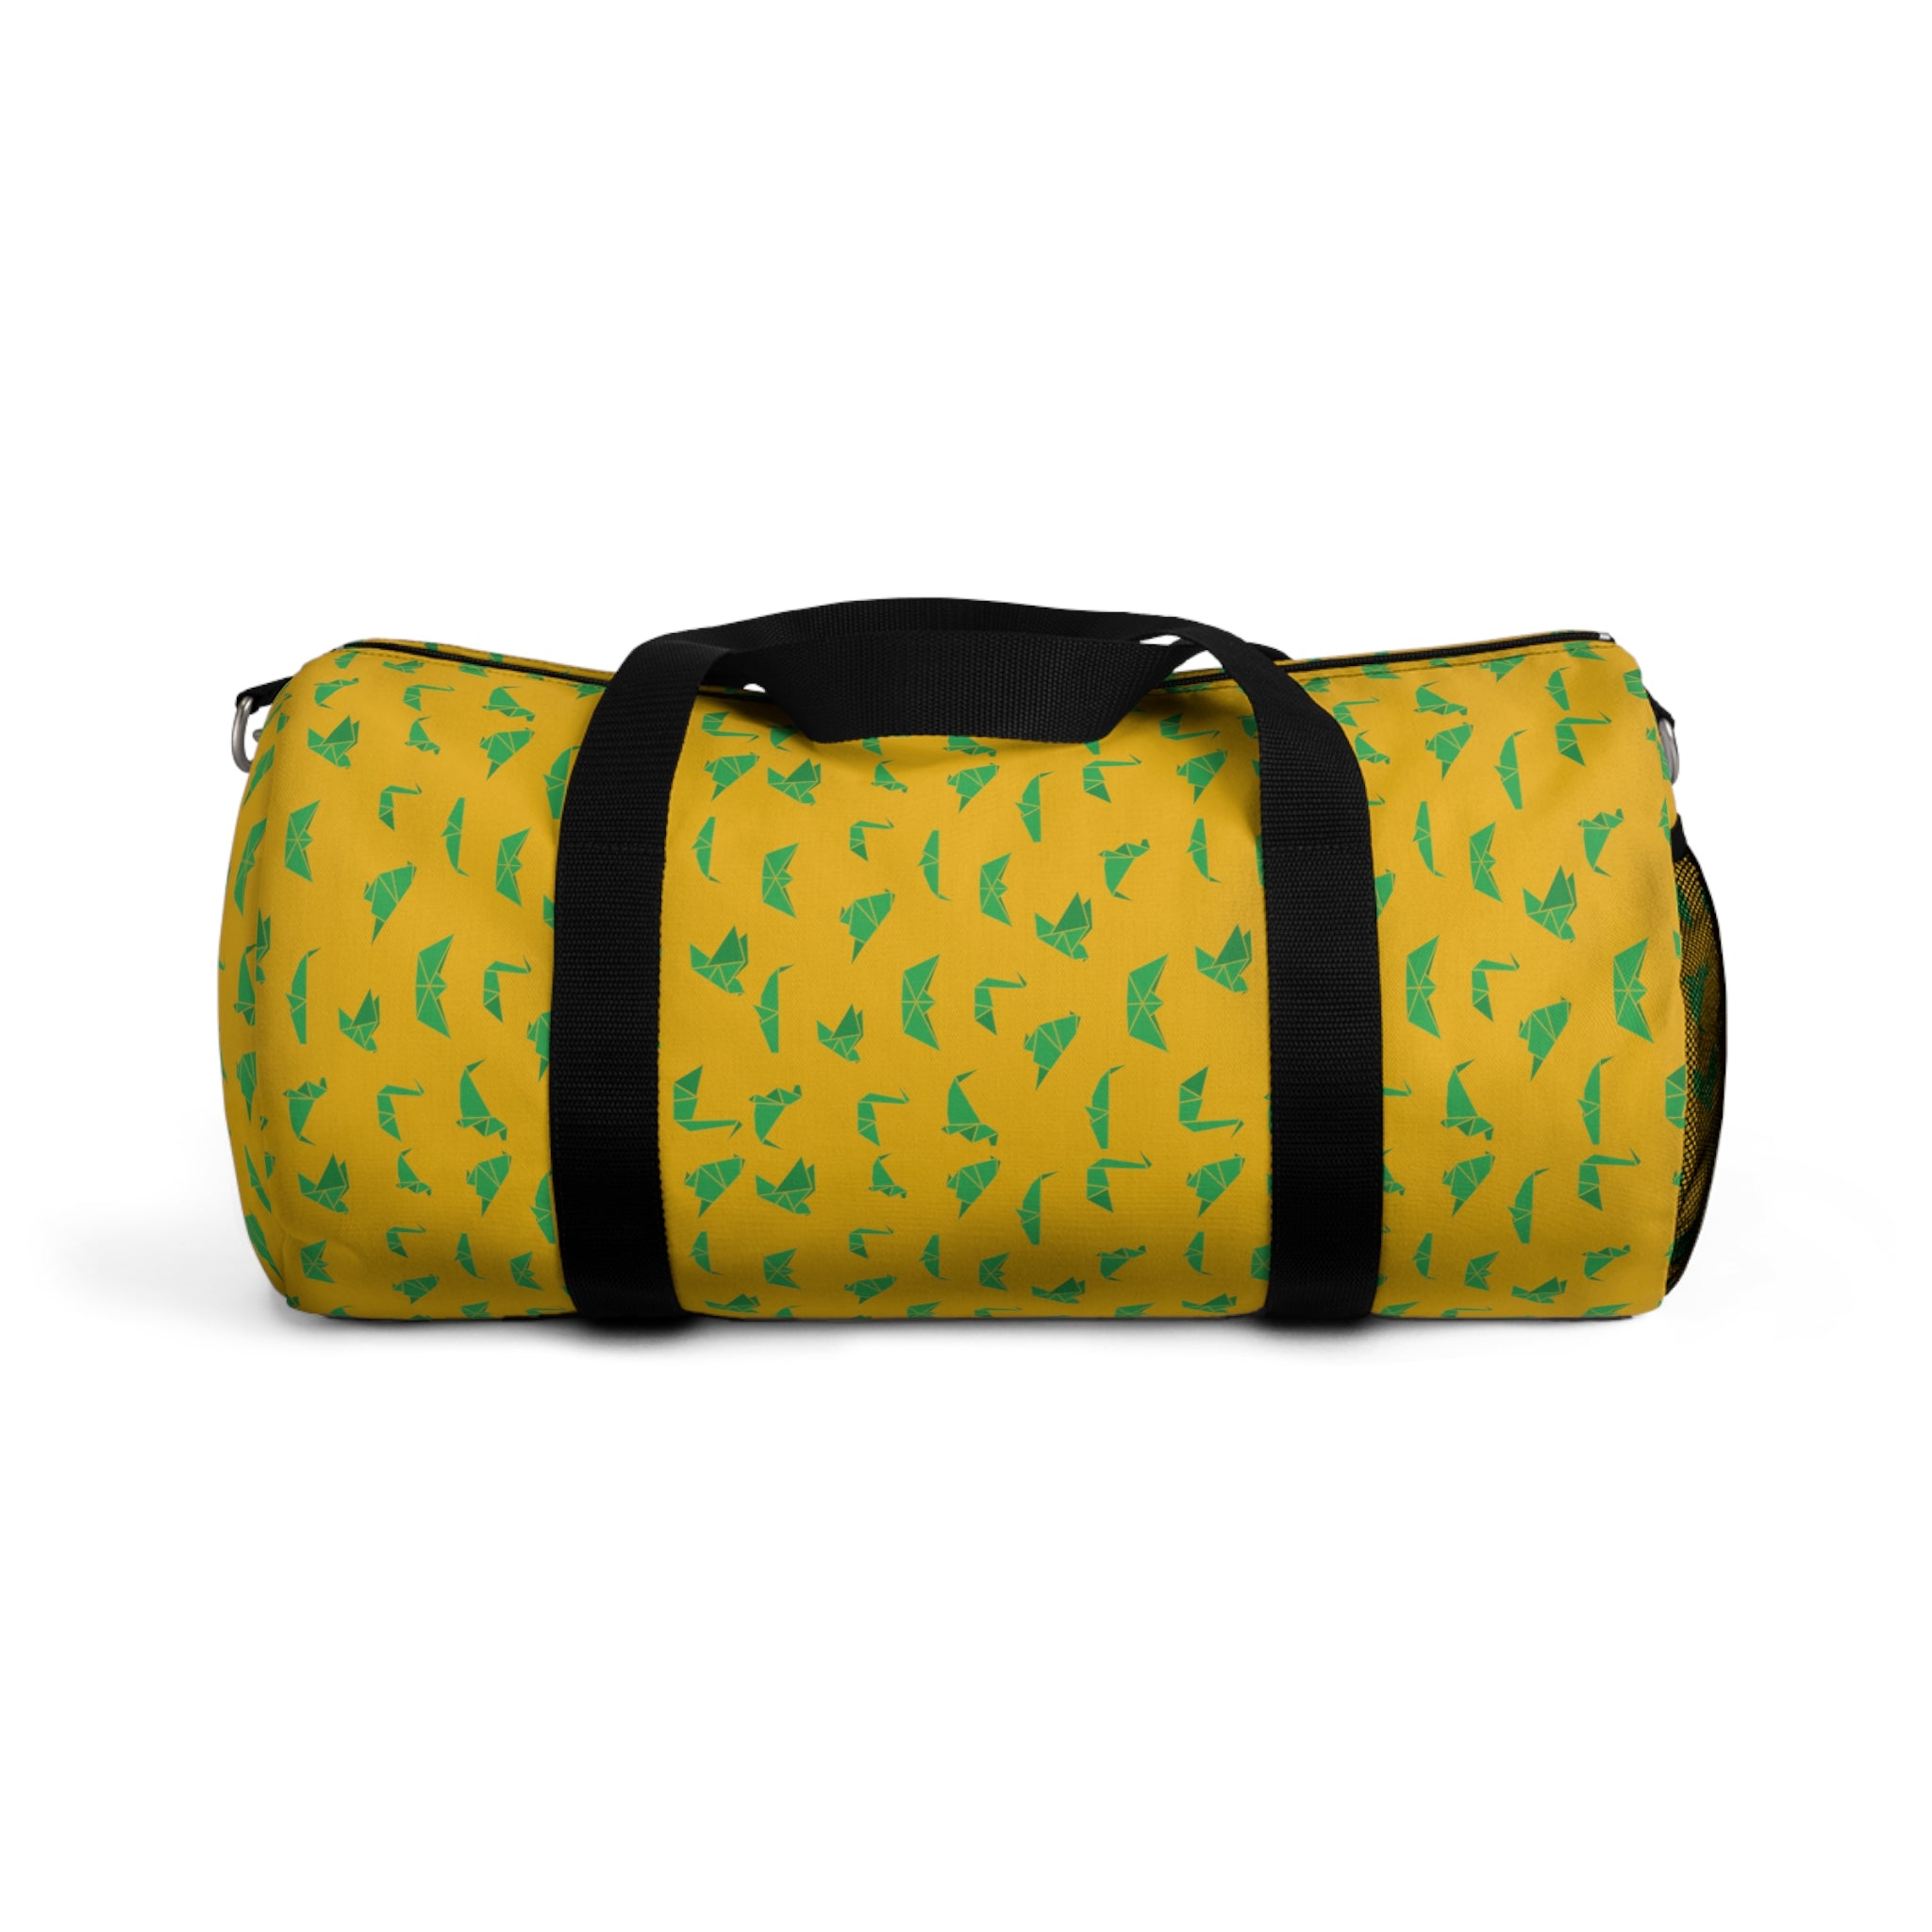 Yellow Crane Print Duffel Bag, Green Japanese Crane Print Pattern Print Designer Premium All Day Small Or Large Size Duffel or Gym Bag, Made in USA, Womens Large Patterned Duffle Bag, Gym Bag For Ladies, Patterned Duffle Bag